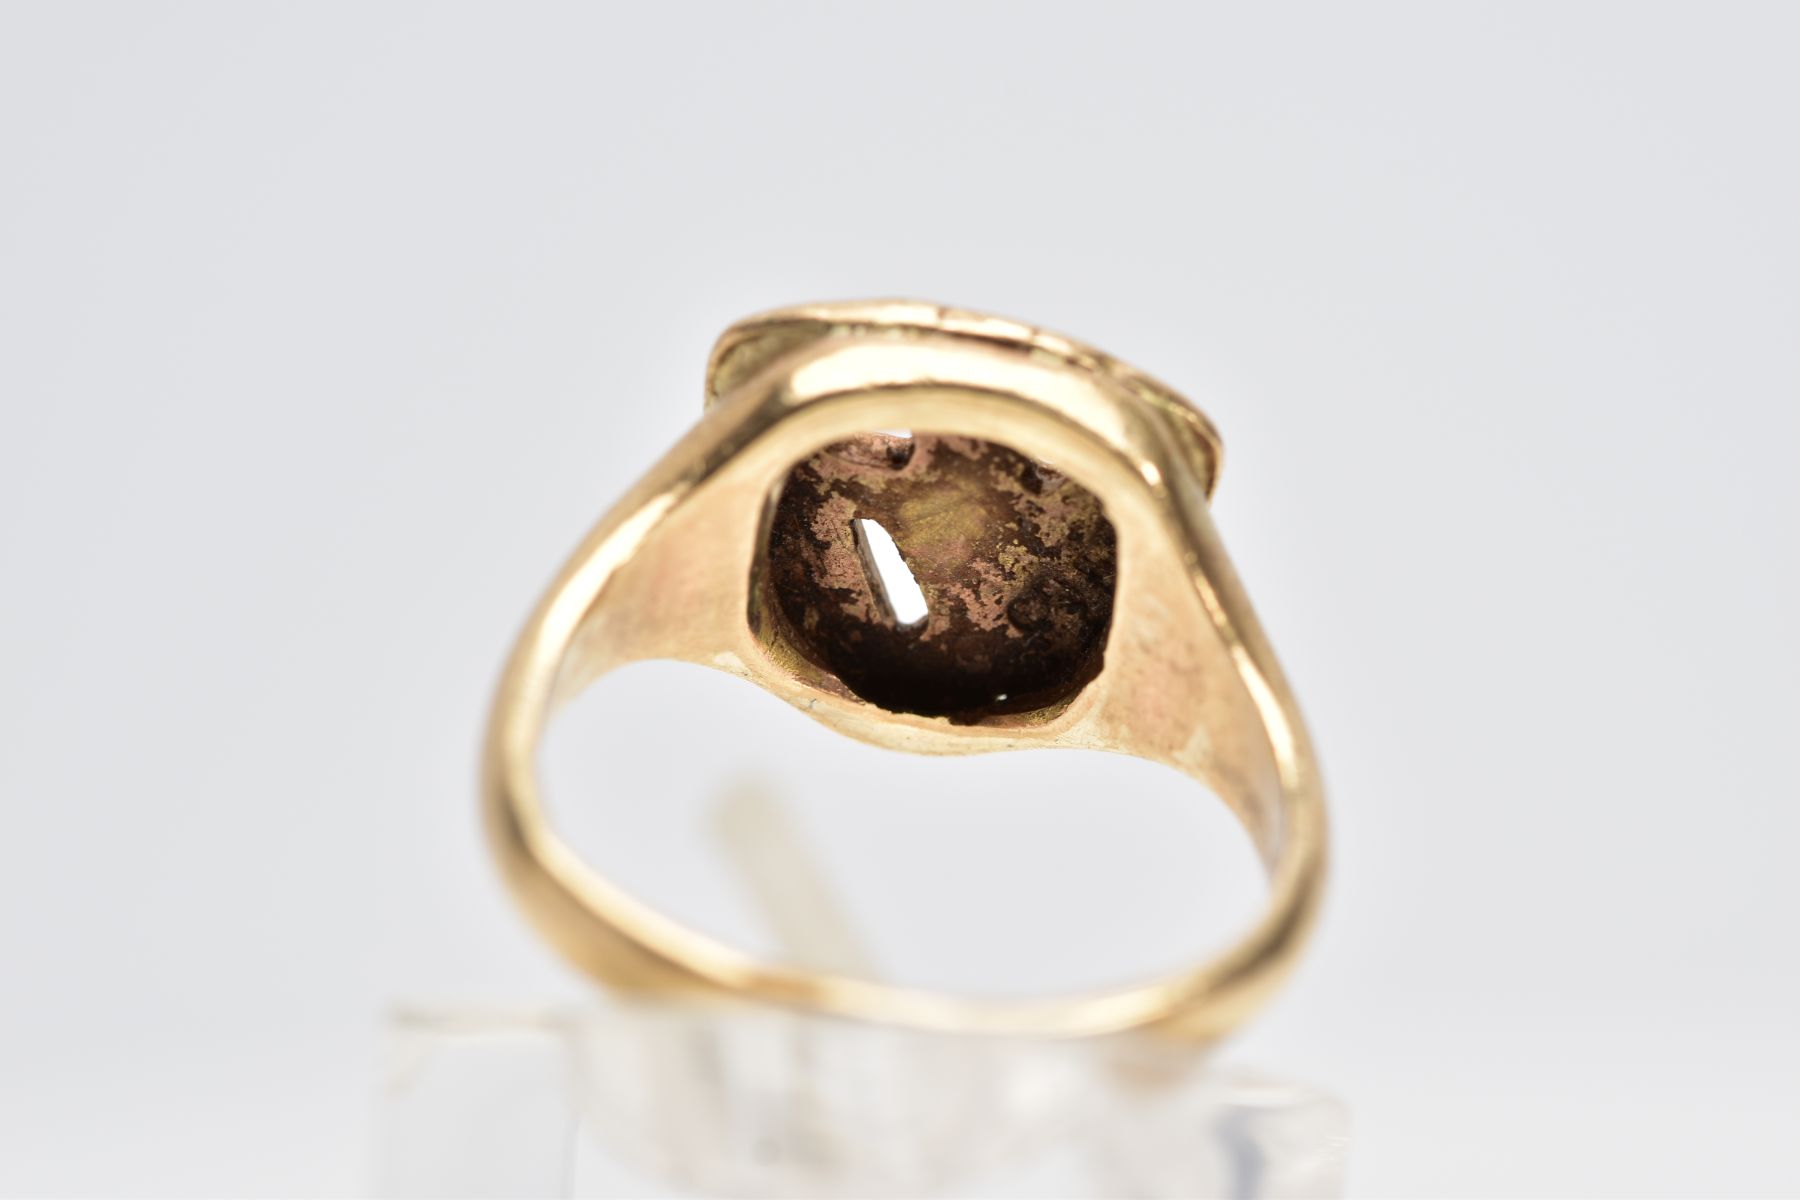 A GENTS 9CT GOLD RING, designed with an openwork 'Good Year' emblem, plain polished band, hallmarked - Image 3 of 3